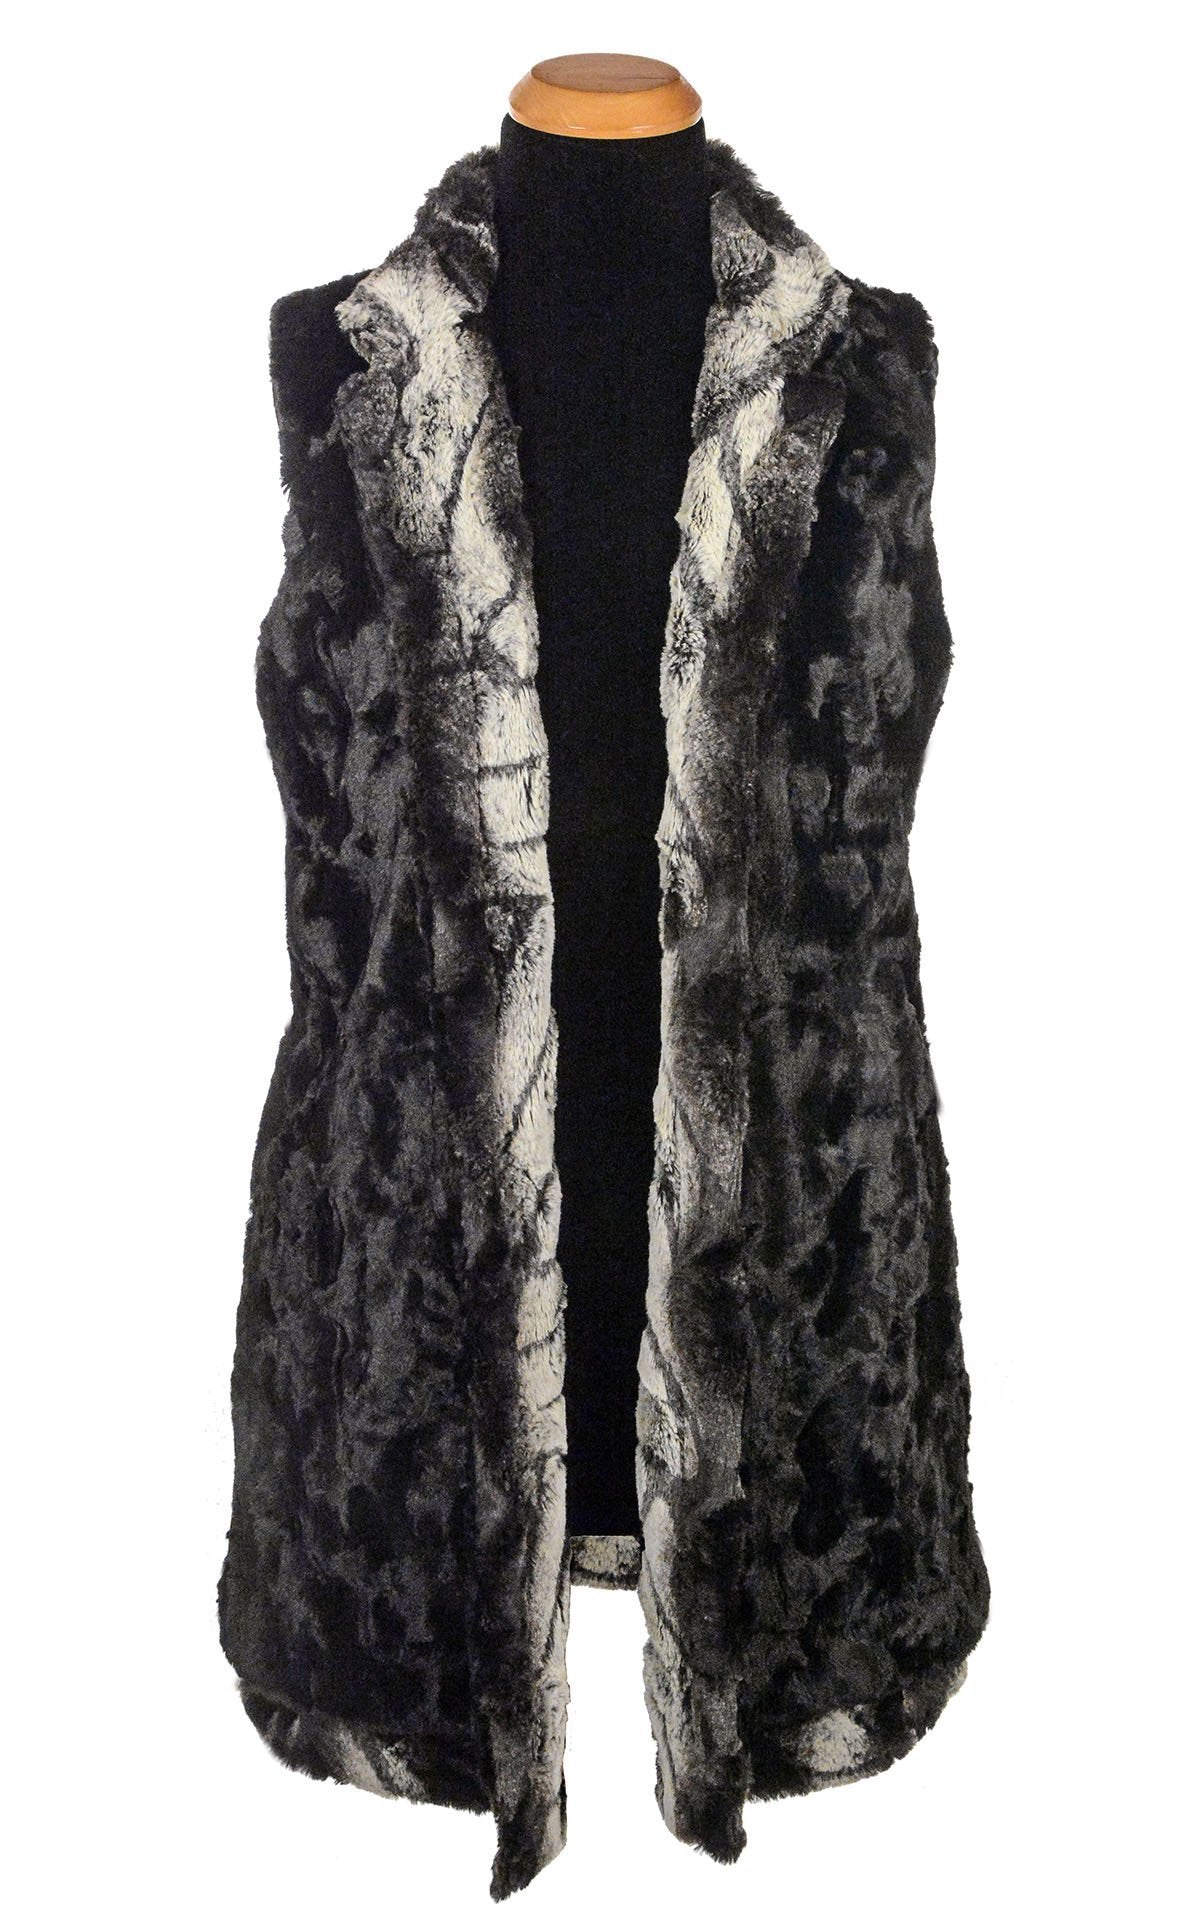 Mandarin Vest - Luxury Faux Fur in Honey Badger with Cuddly Fur  - Sold Out!